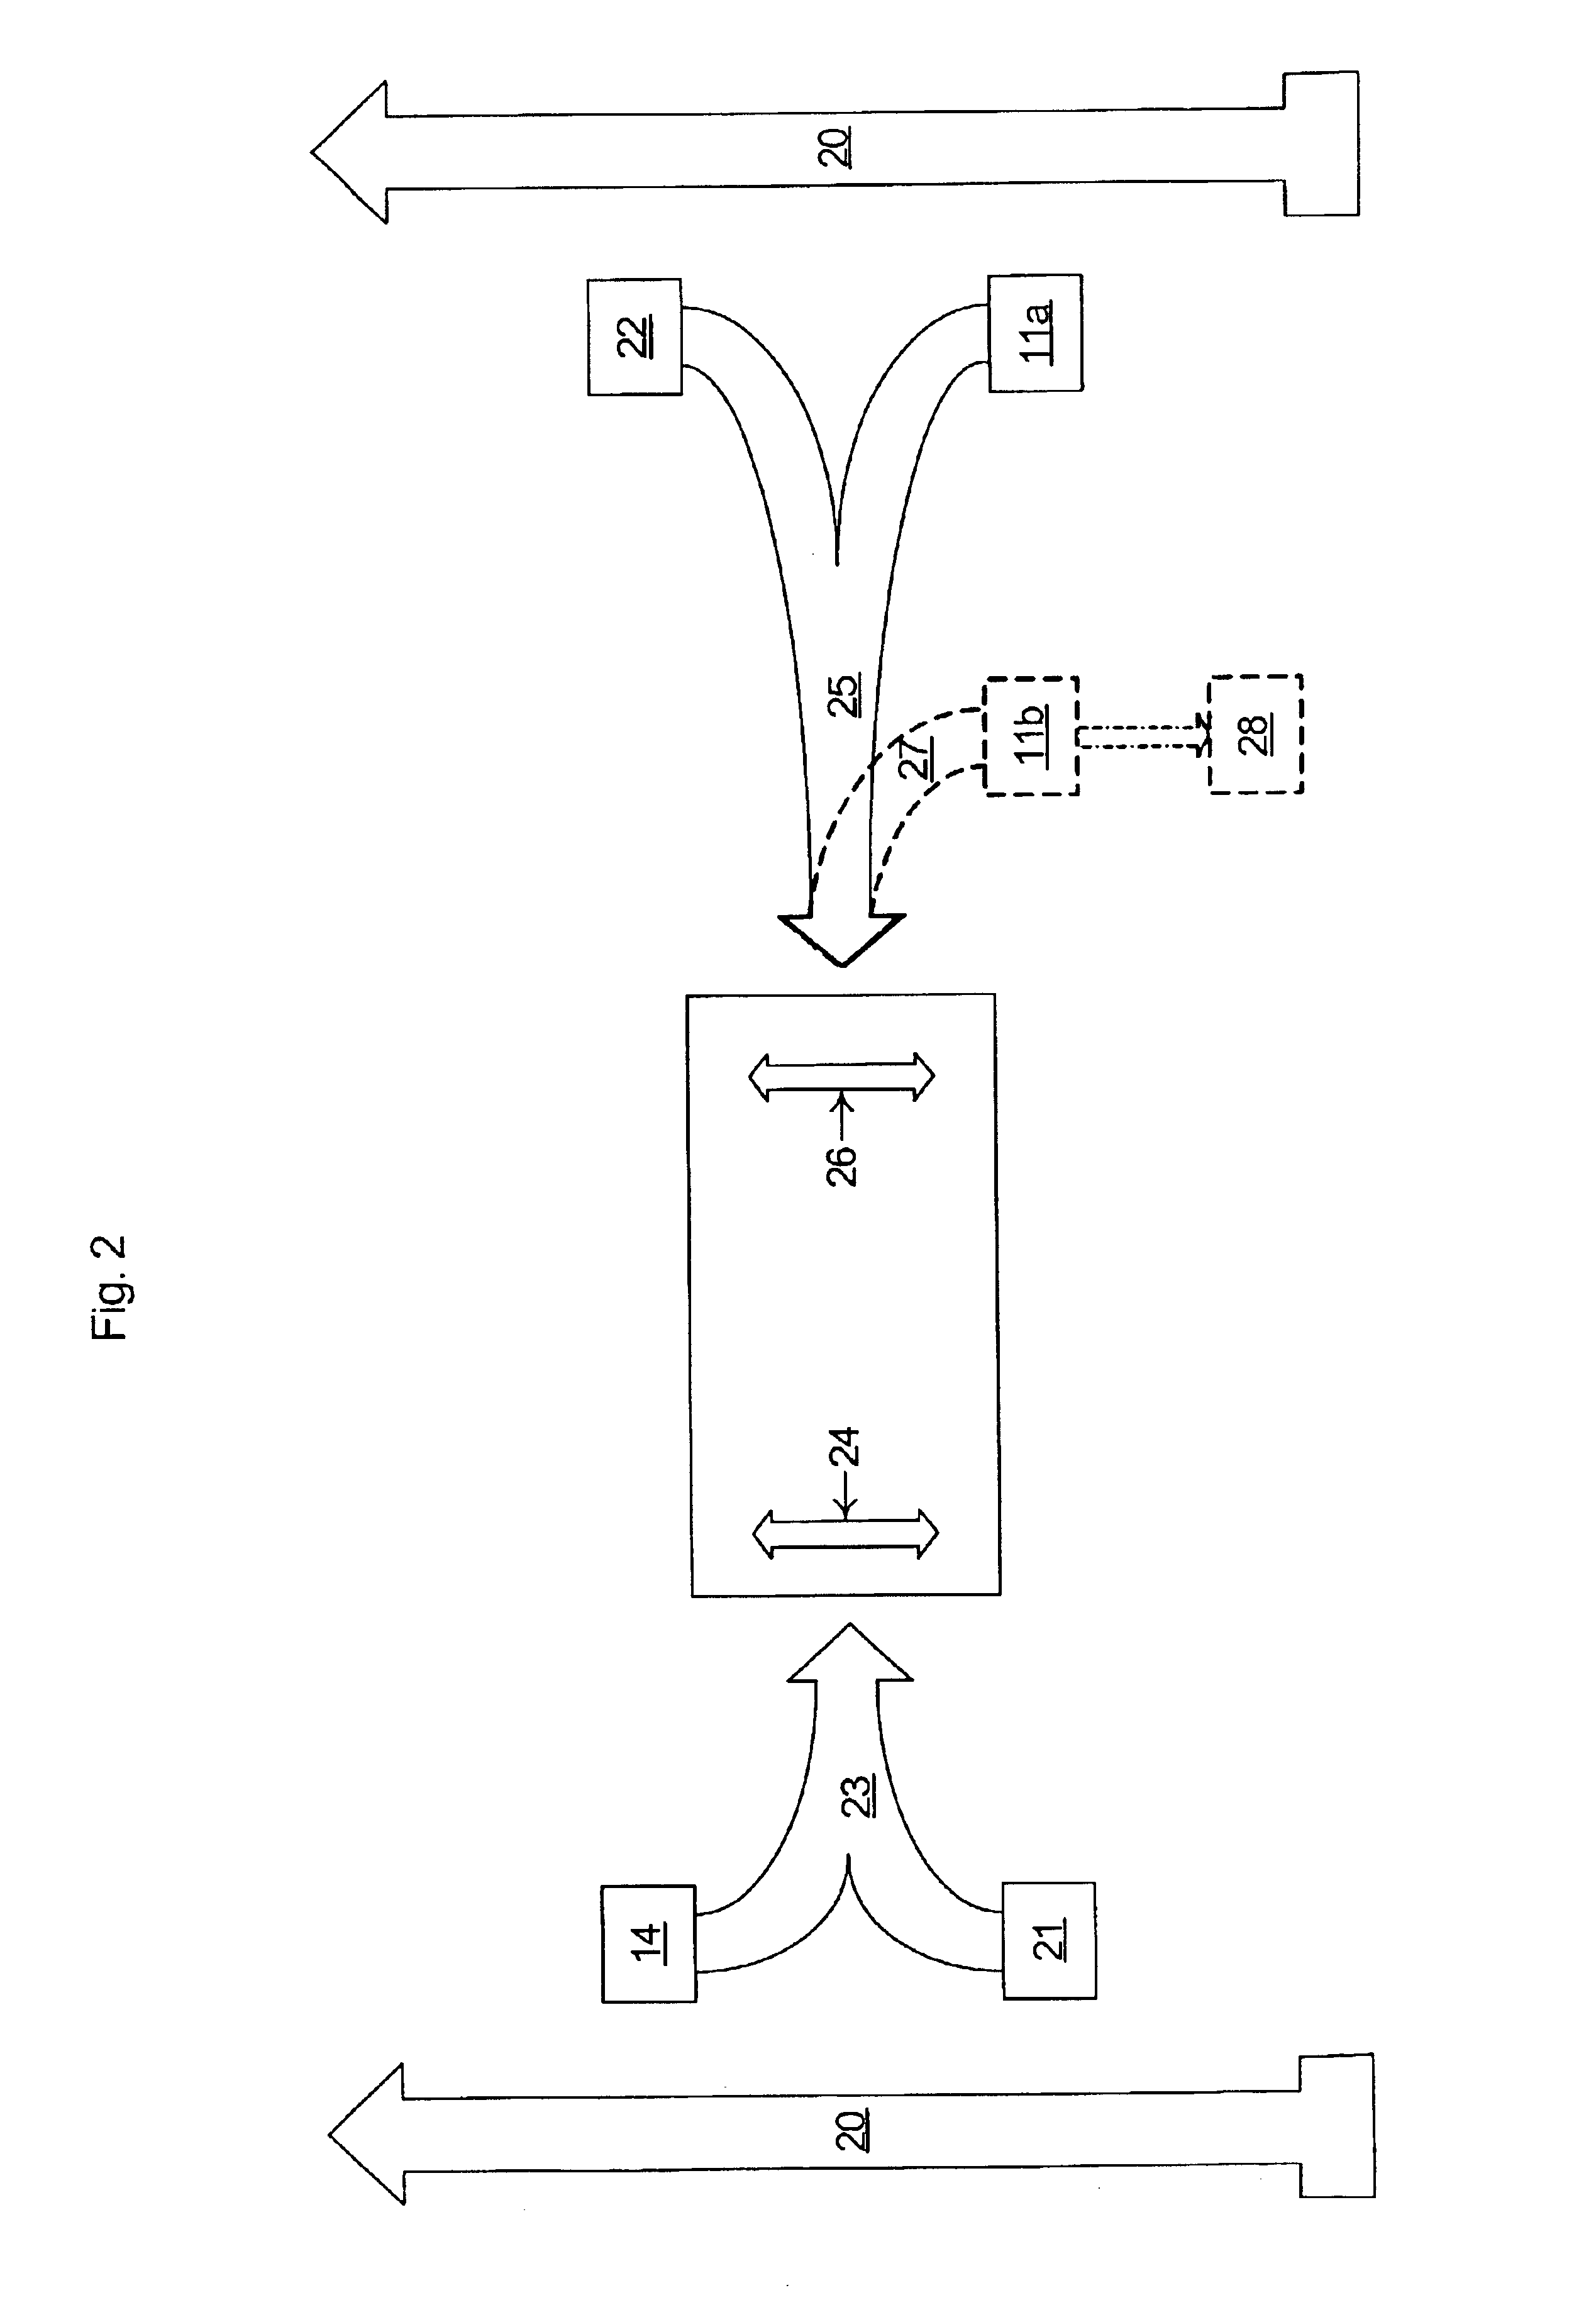 Methods of adjusting the Wobbe Index of a fuel and compositions thereof